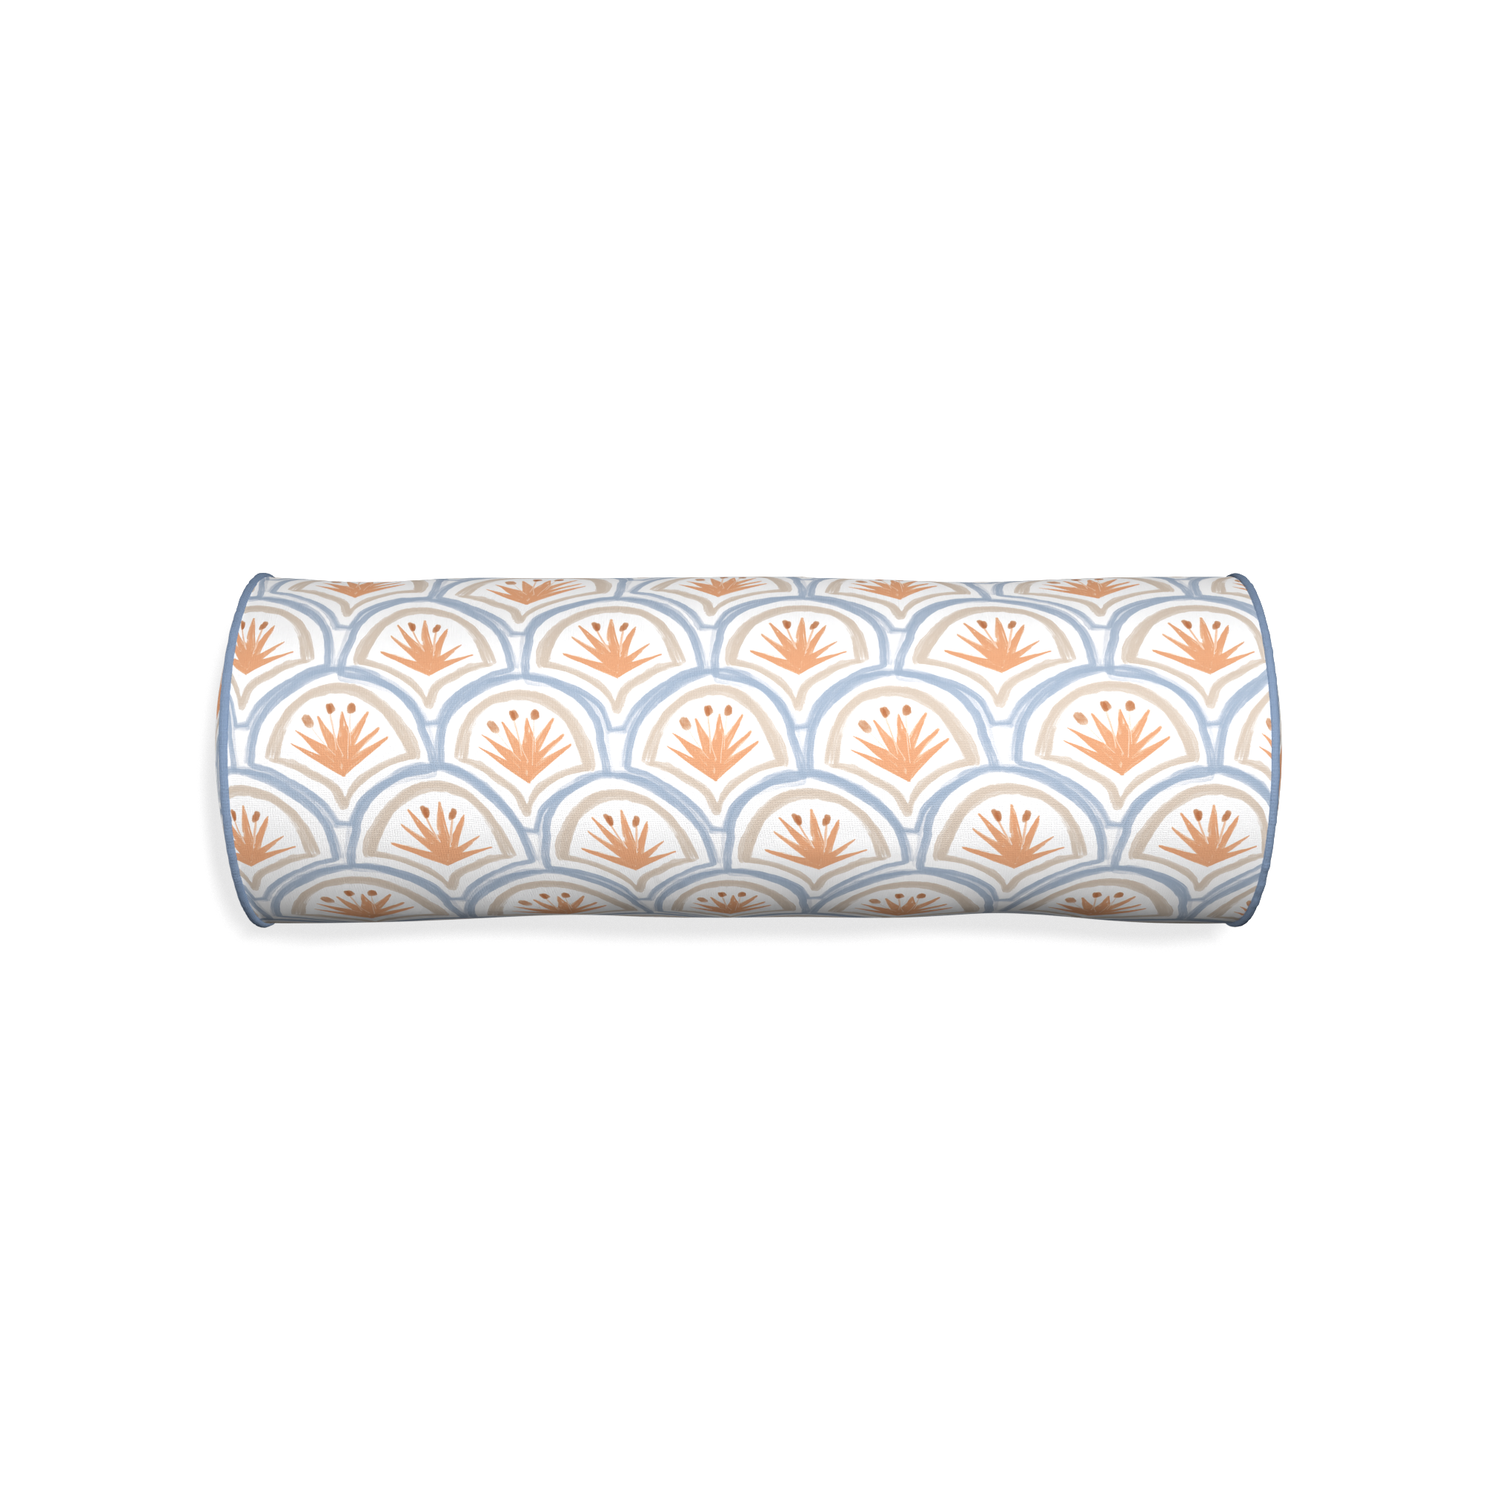 Bolster thatcher apricot custom art deco palm patternpillow with sky piping on white background